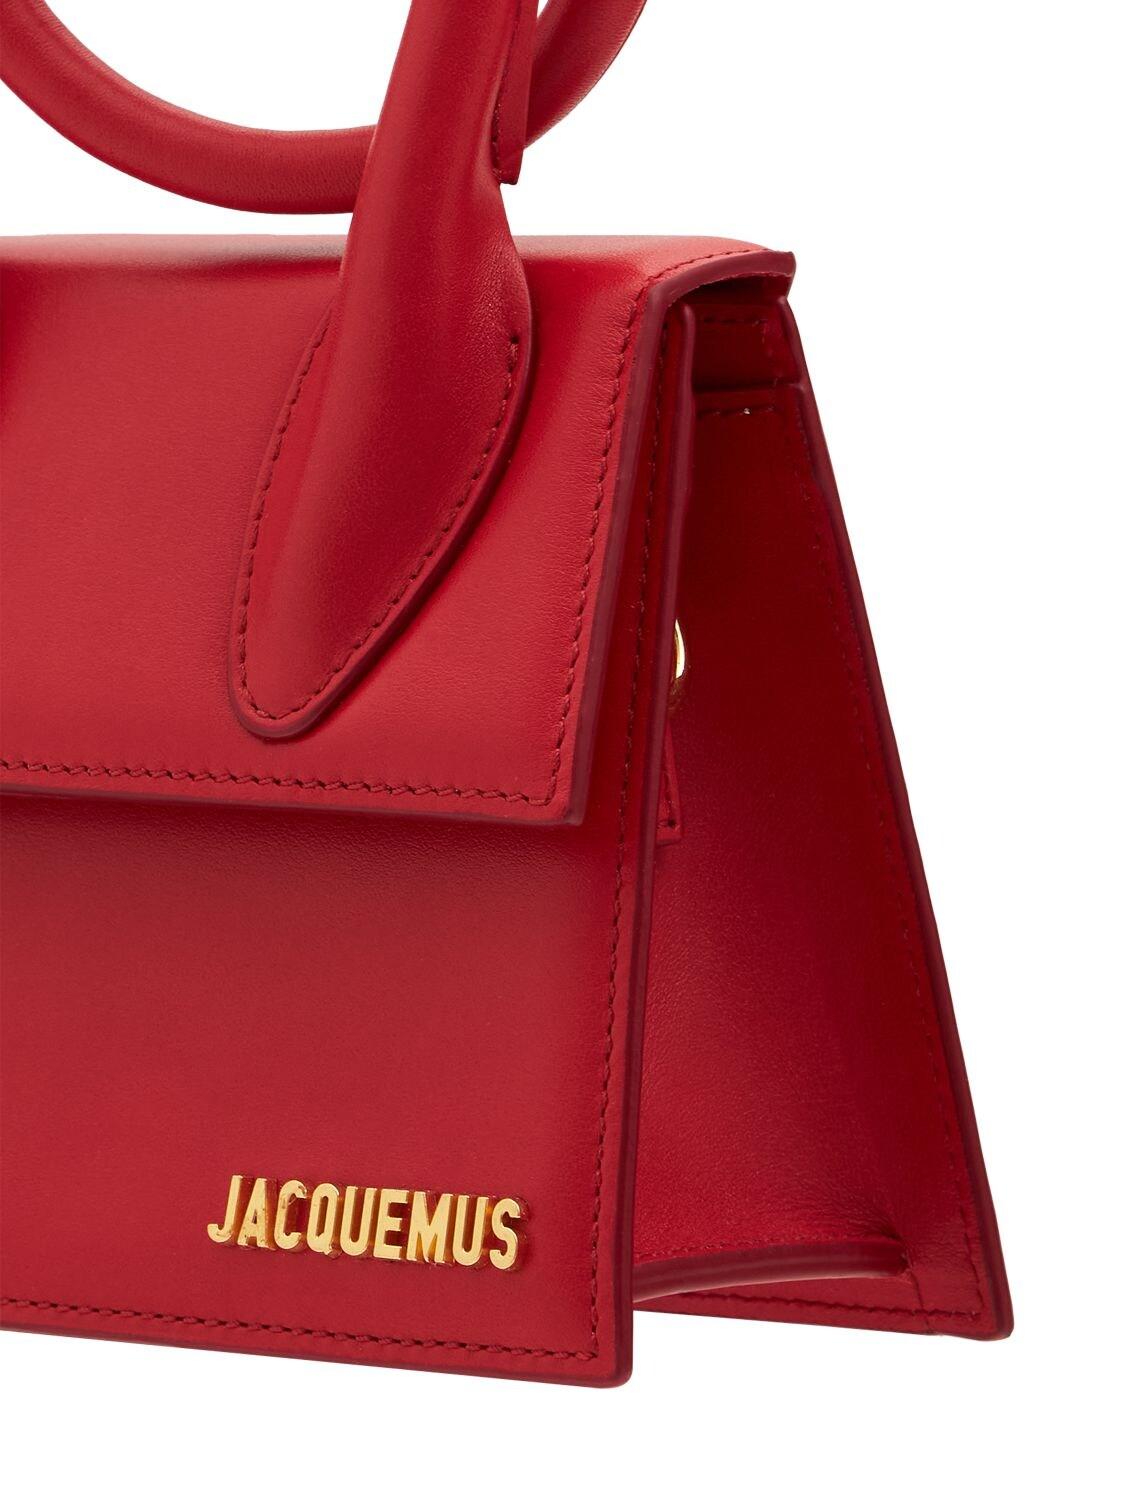 Jacquemus Le Chiquito Noeud Leather Shoulder Bag in Red | Lyst